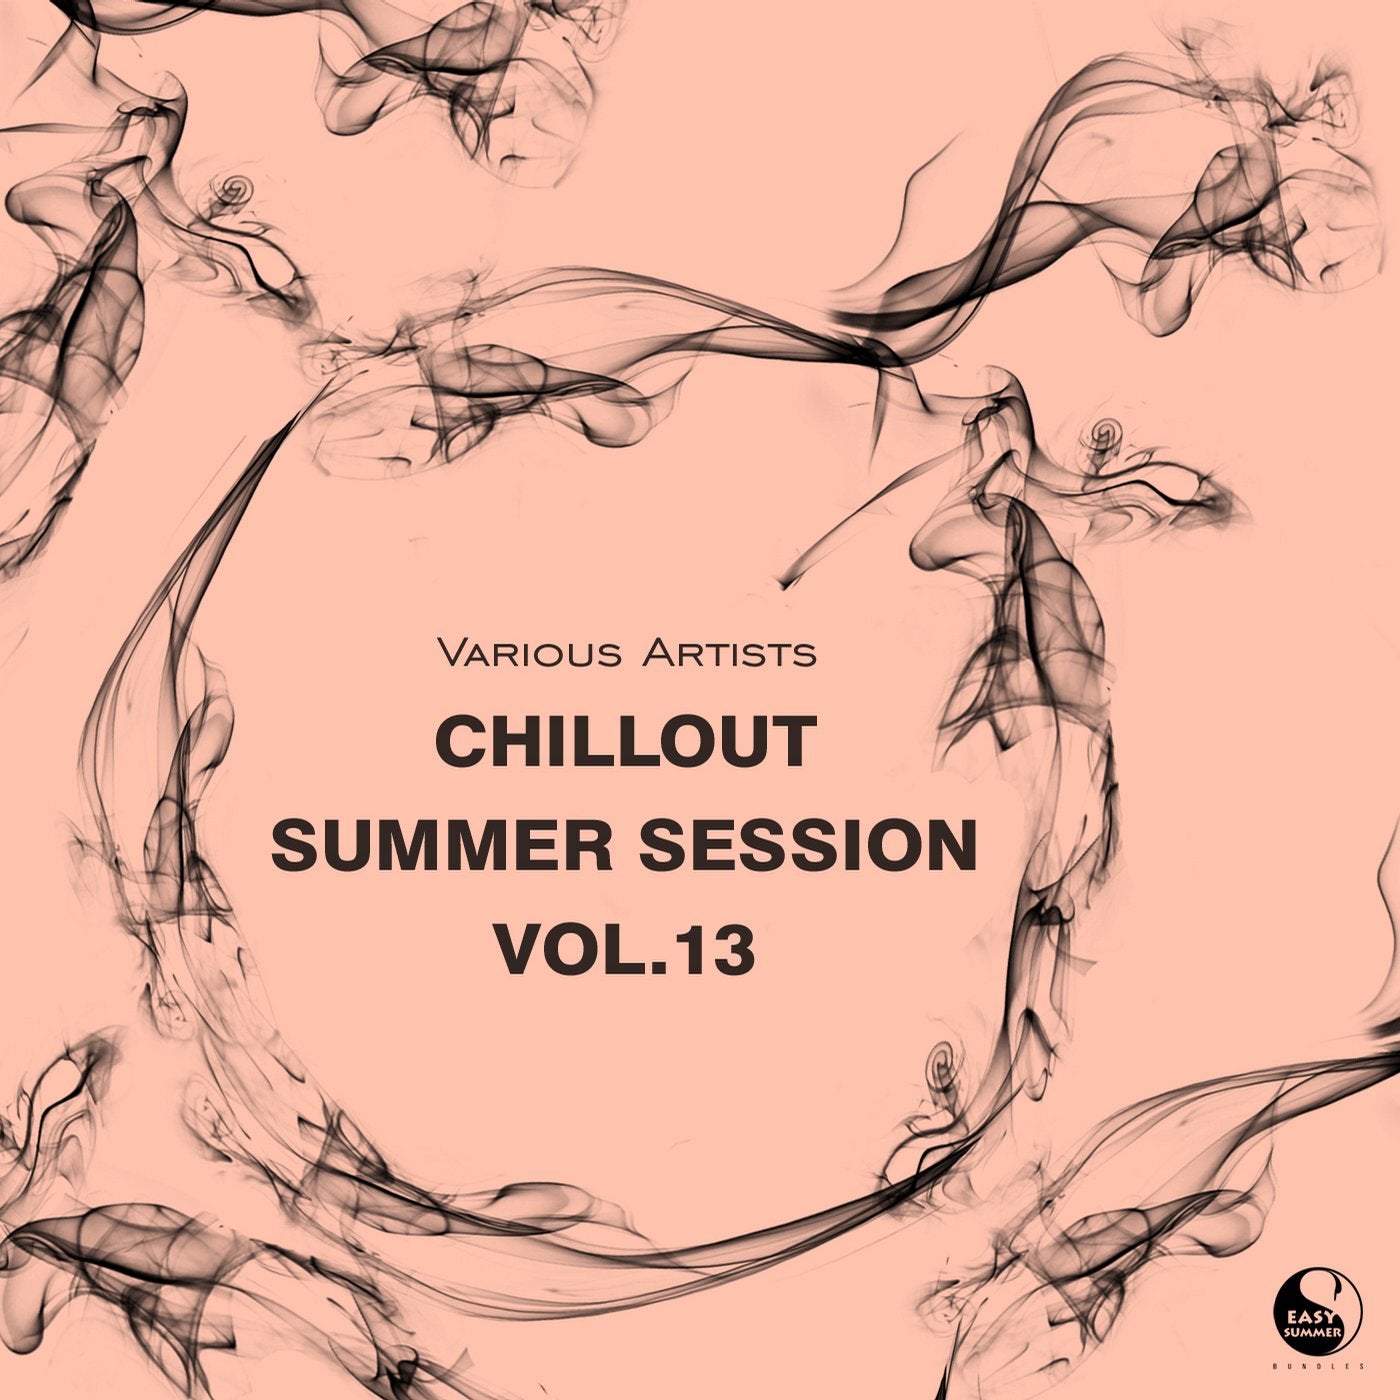 Chillout Summer Session Vol.13